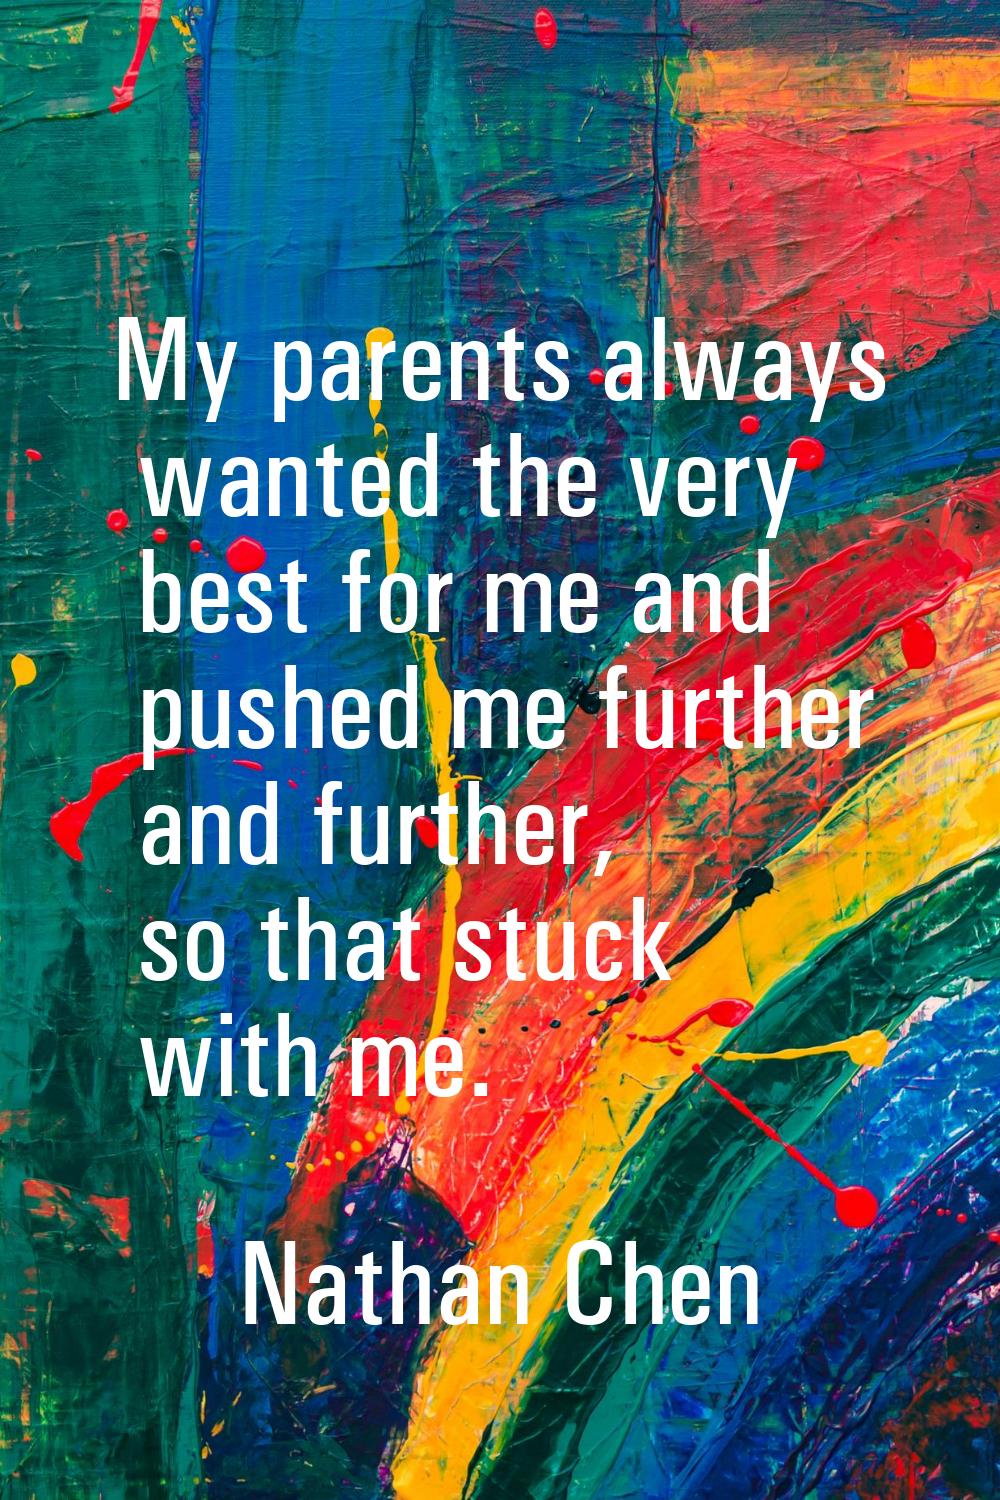 My parents always wanted the very best for me and pushed me further and further, so that stuck with